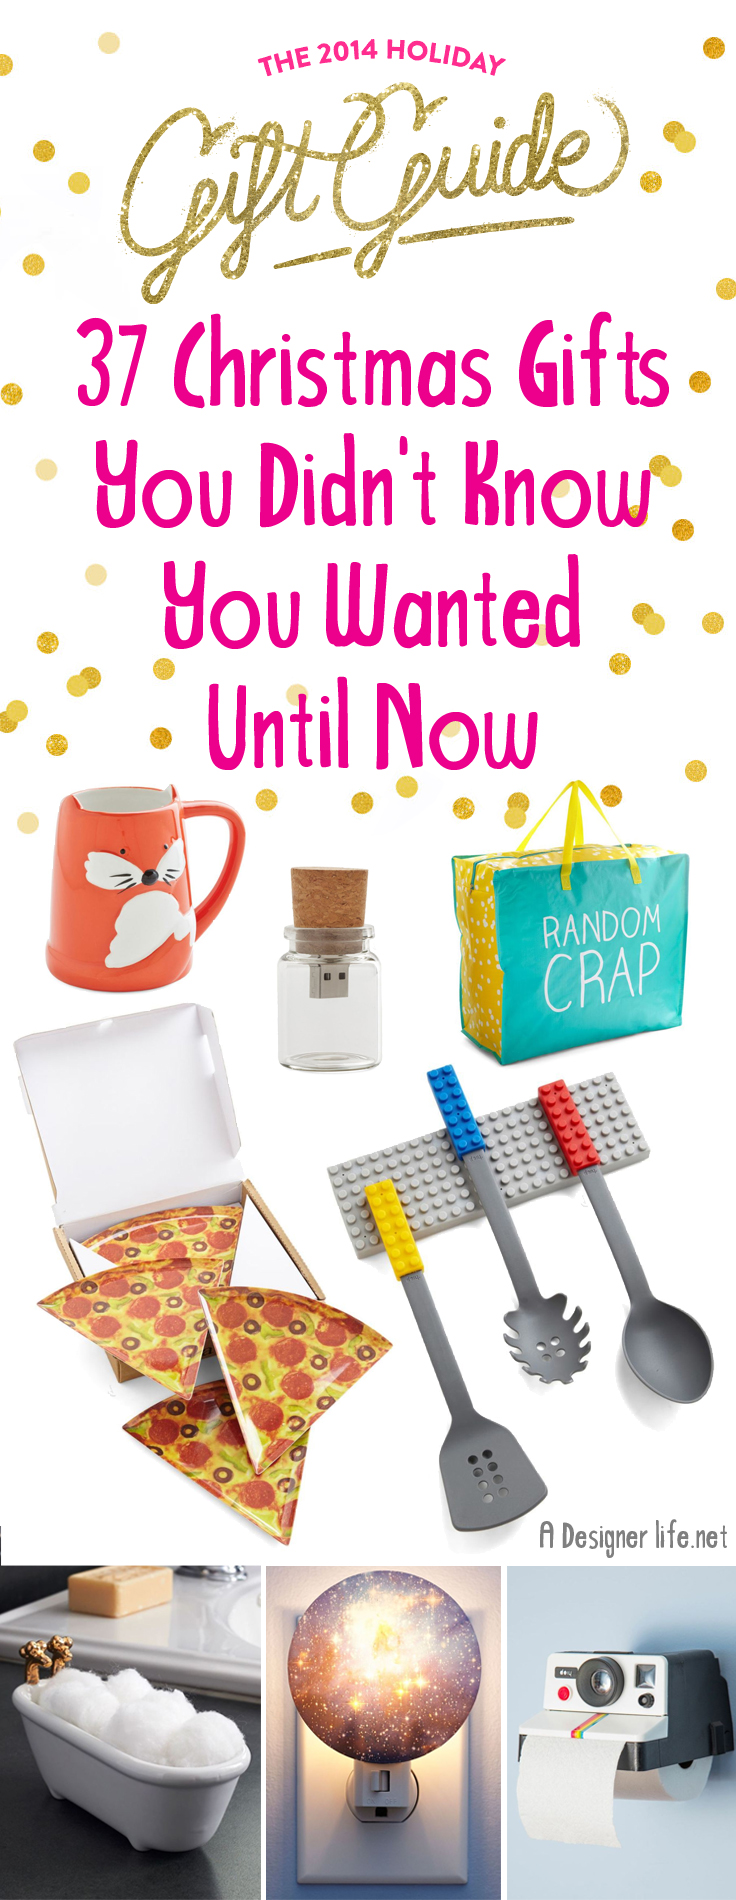 Awesome Products: Holiday Gift Guide - 37 Christmas Gifts You Didn